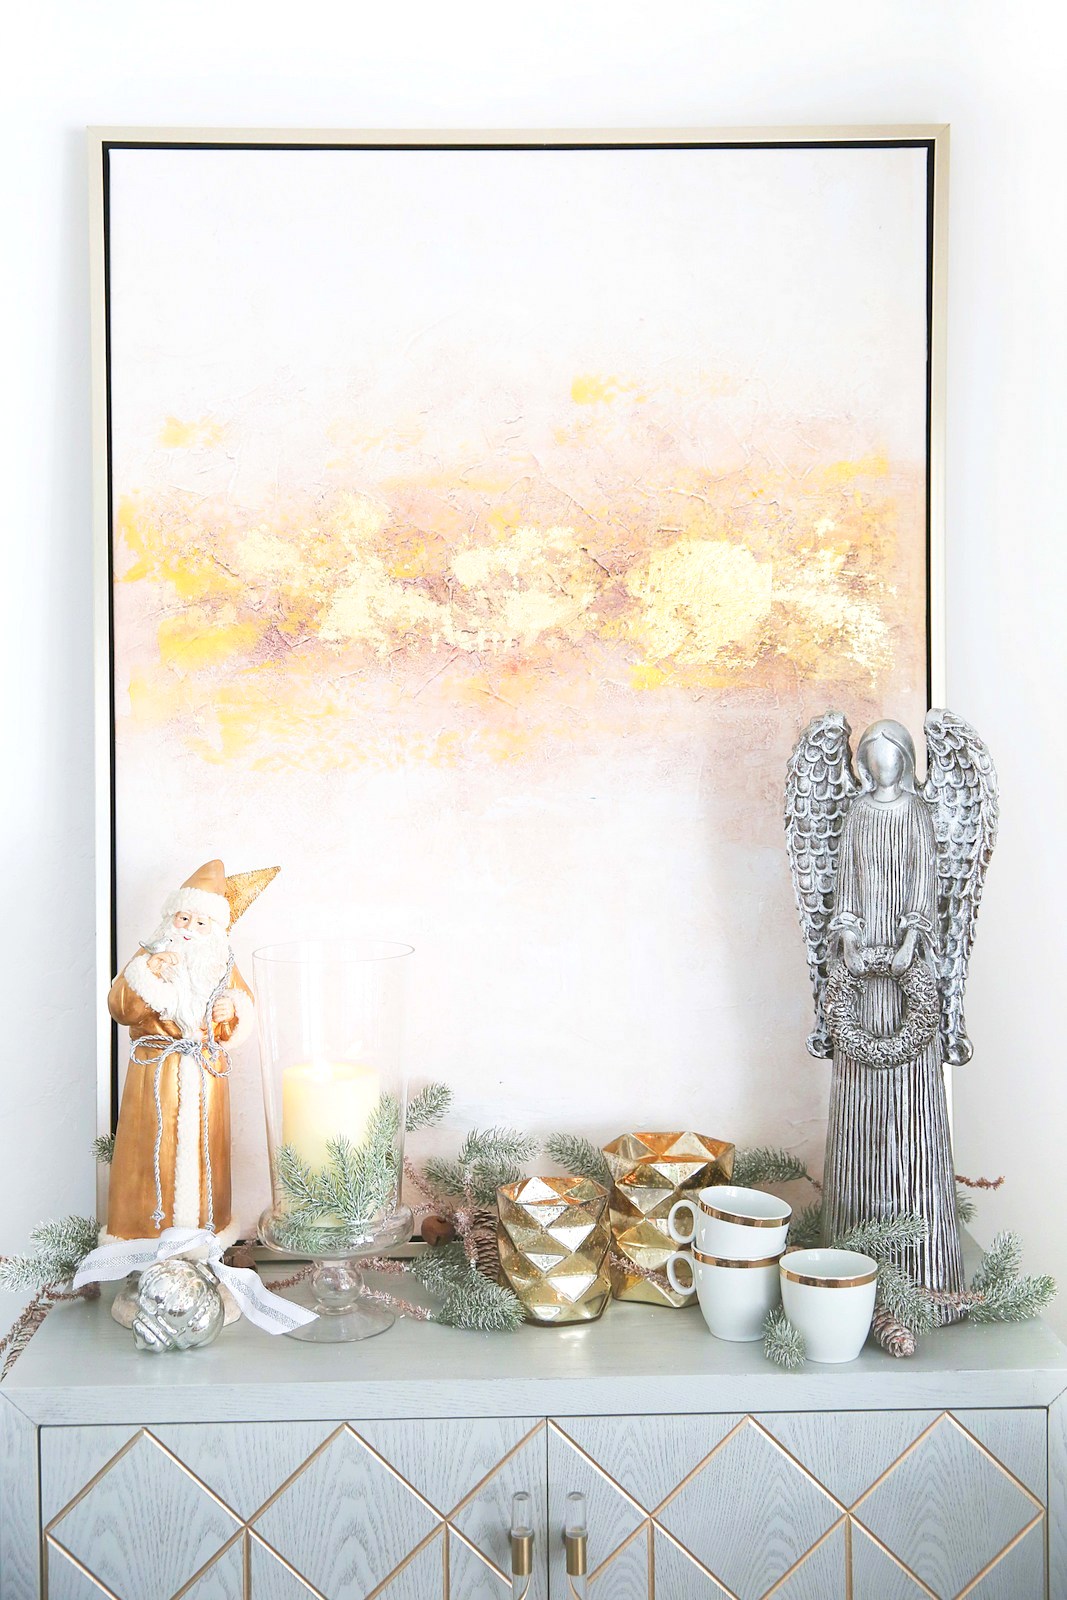 Our New Home Big Reveal: Dining Room Holiday Decor Ideas by Utah style blogger Sandy A La Mode